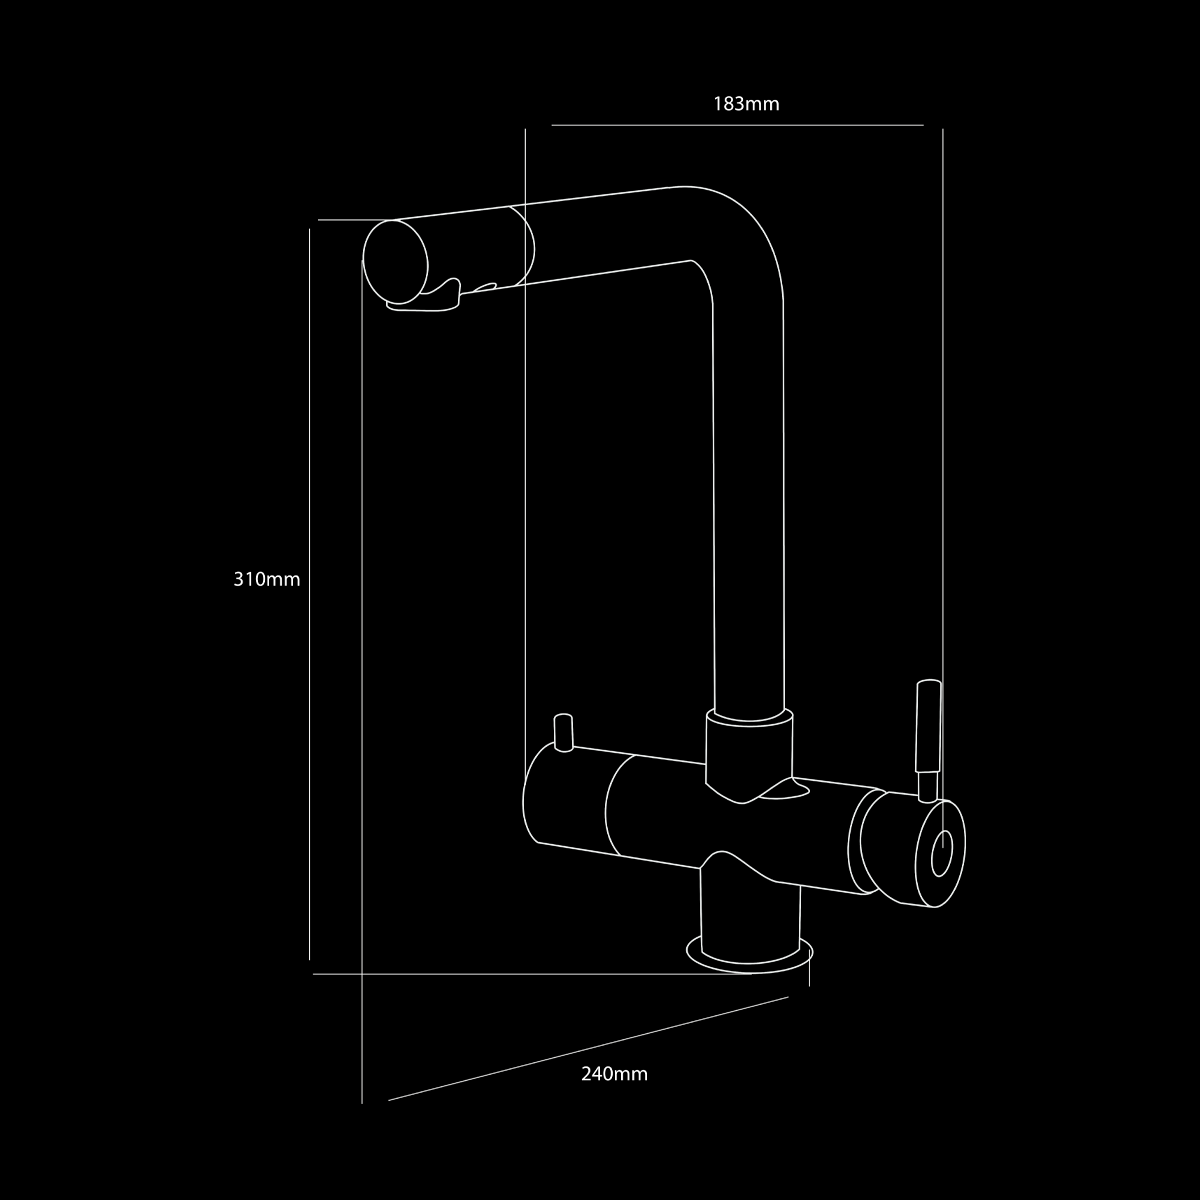 Taurus-schematic-3-way-taps-product-images